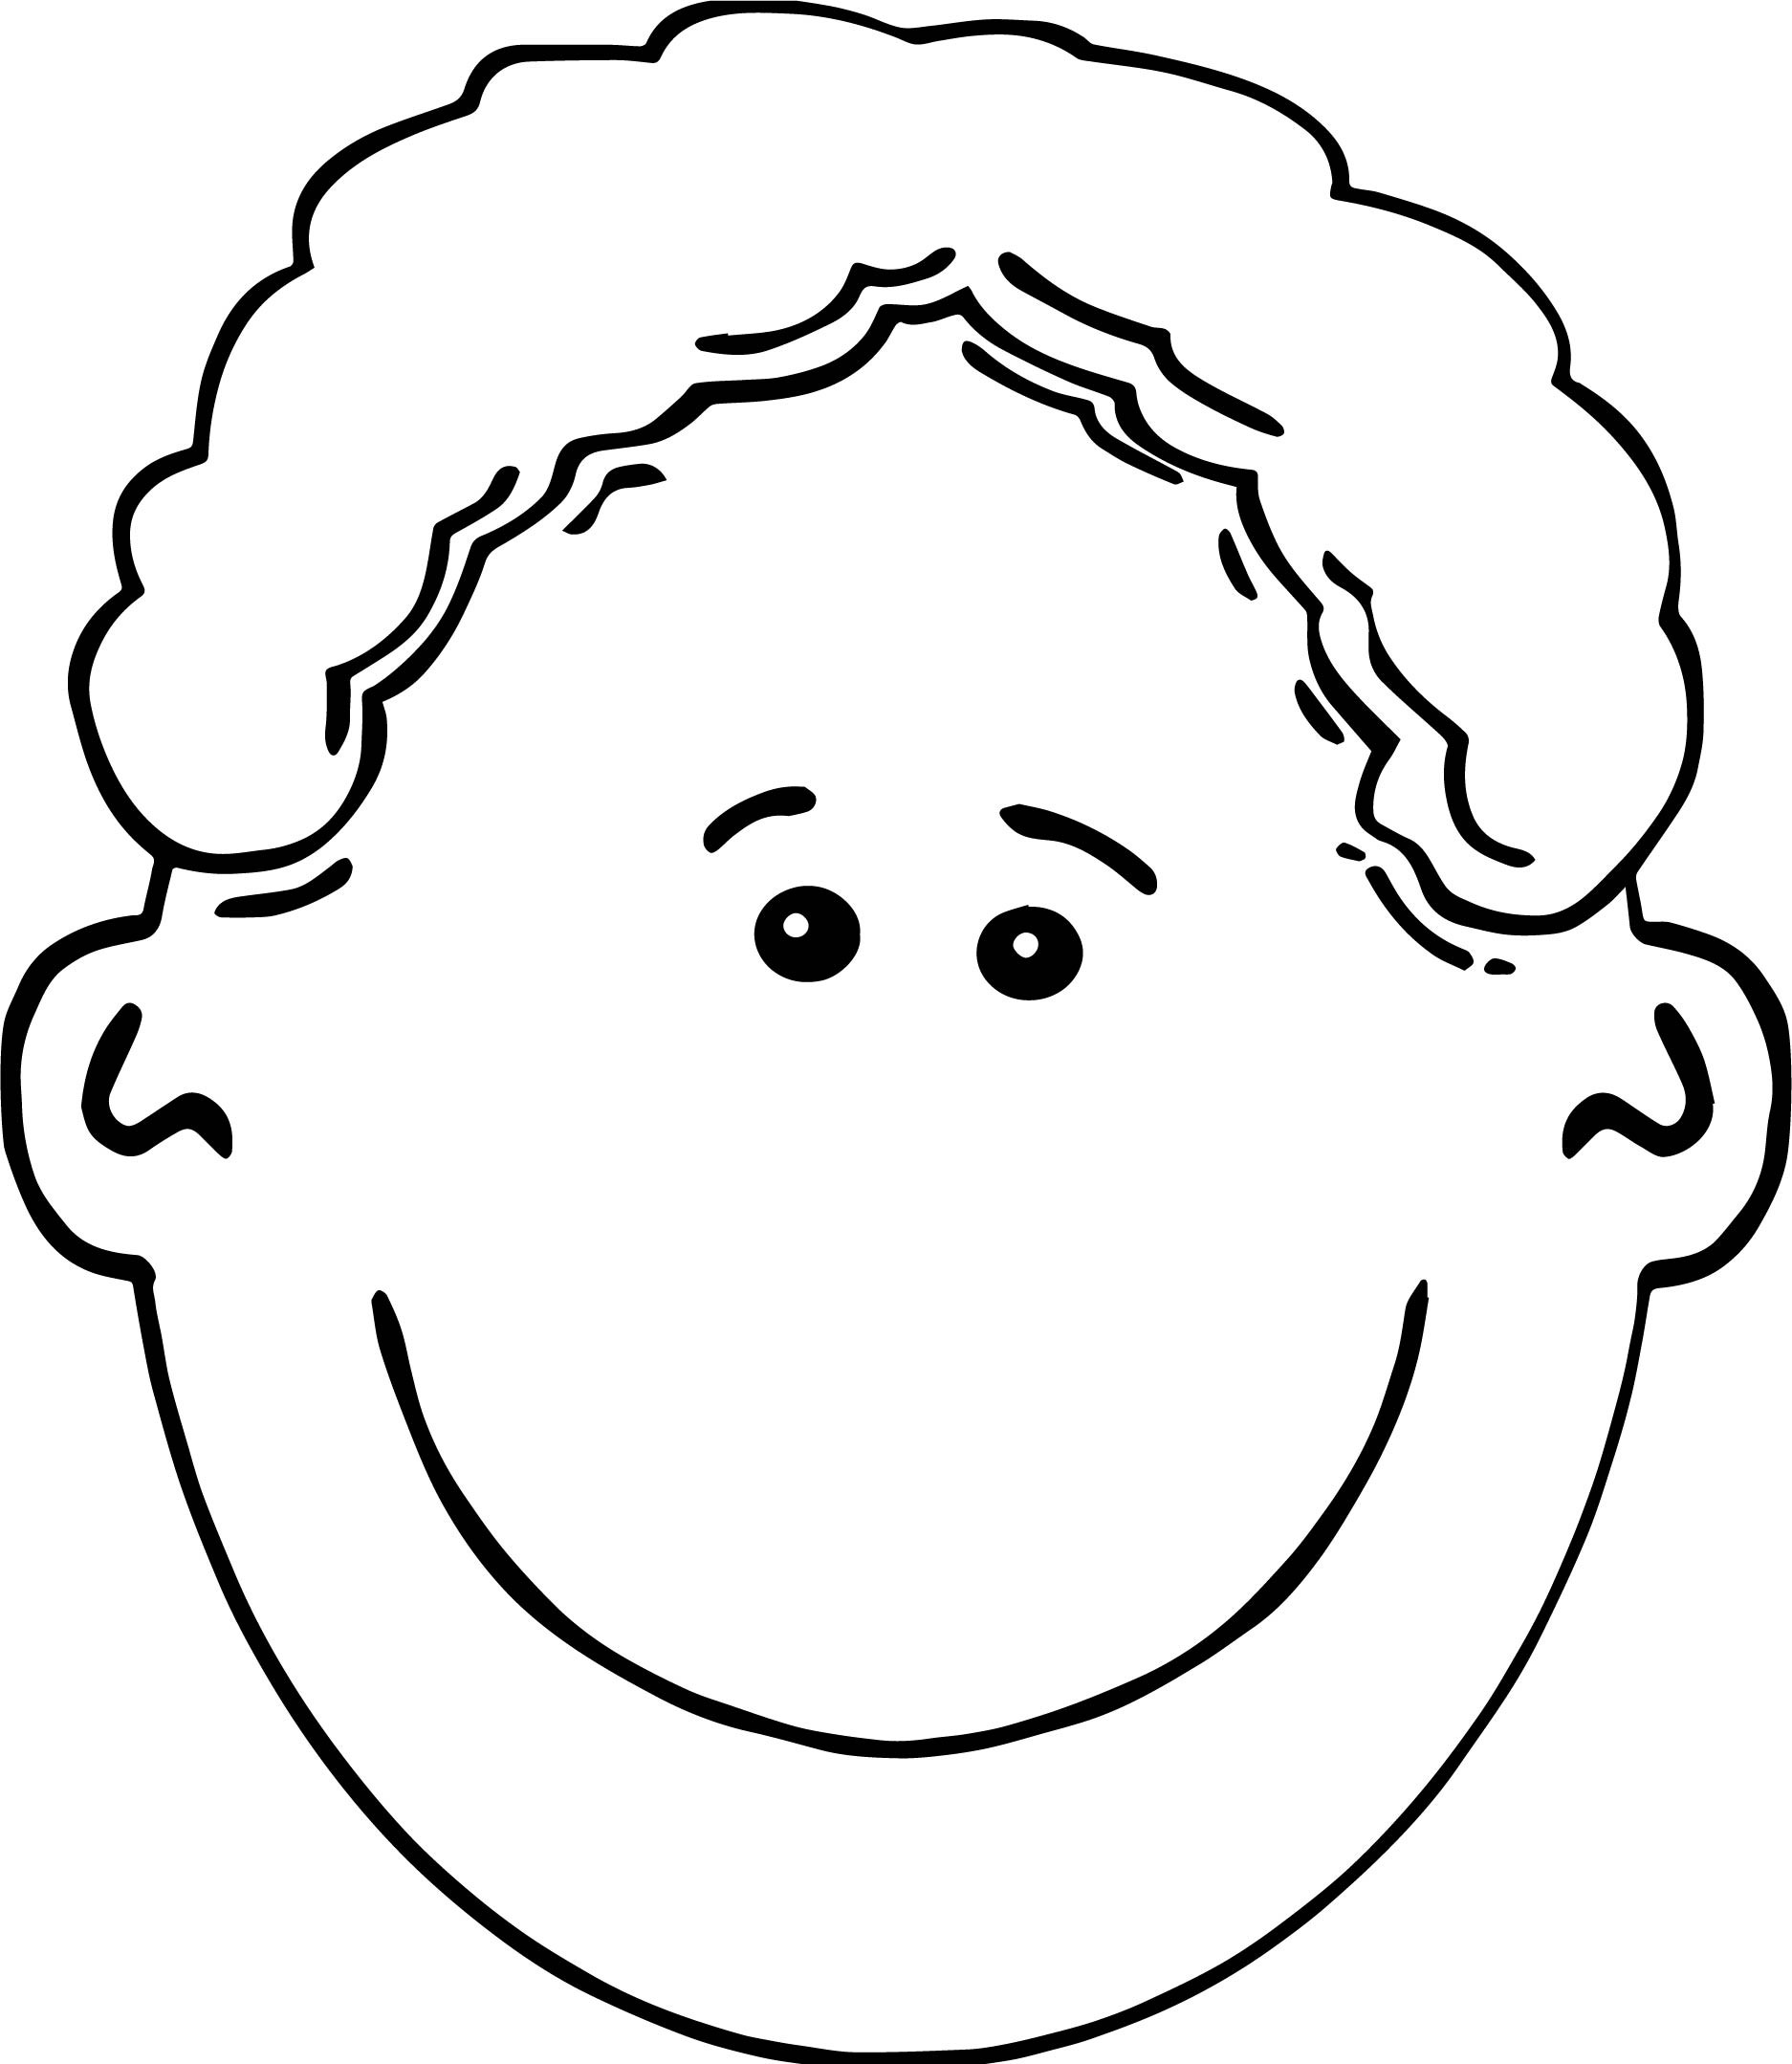 Coloring Pages Of Faces Of Boys
 Big Boy Face Coloring Page